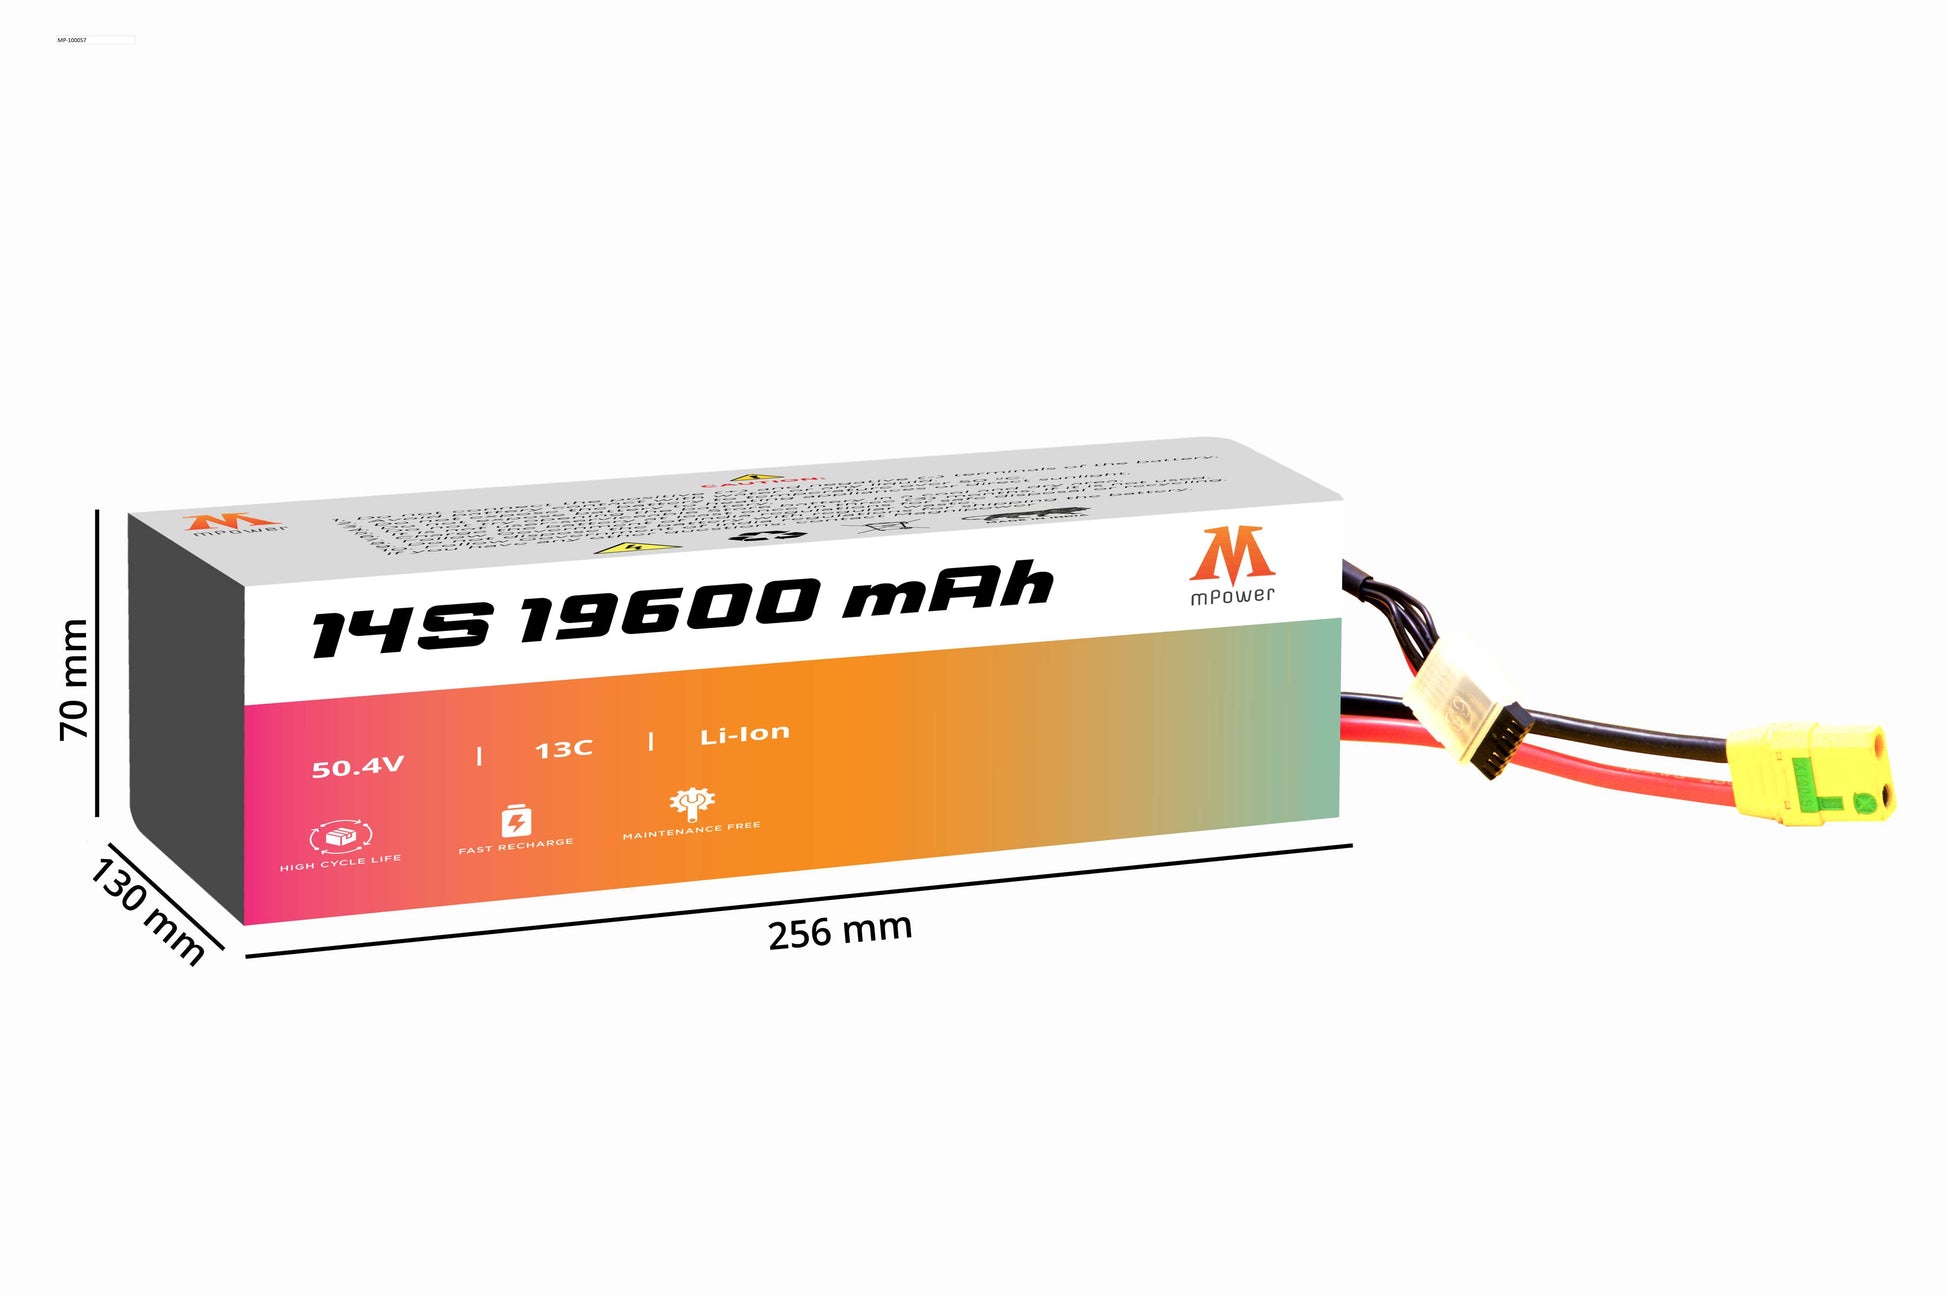 mPower 14S 19600mAh Lithium-Ion Battery for Survey Drones-mpowerlithium